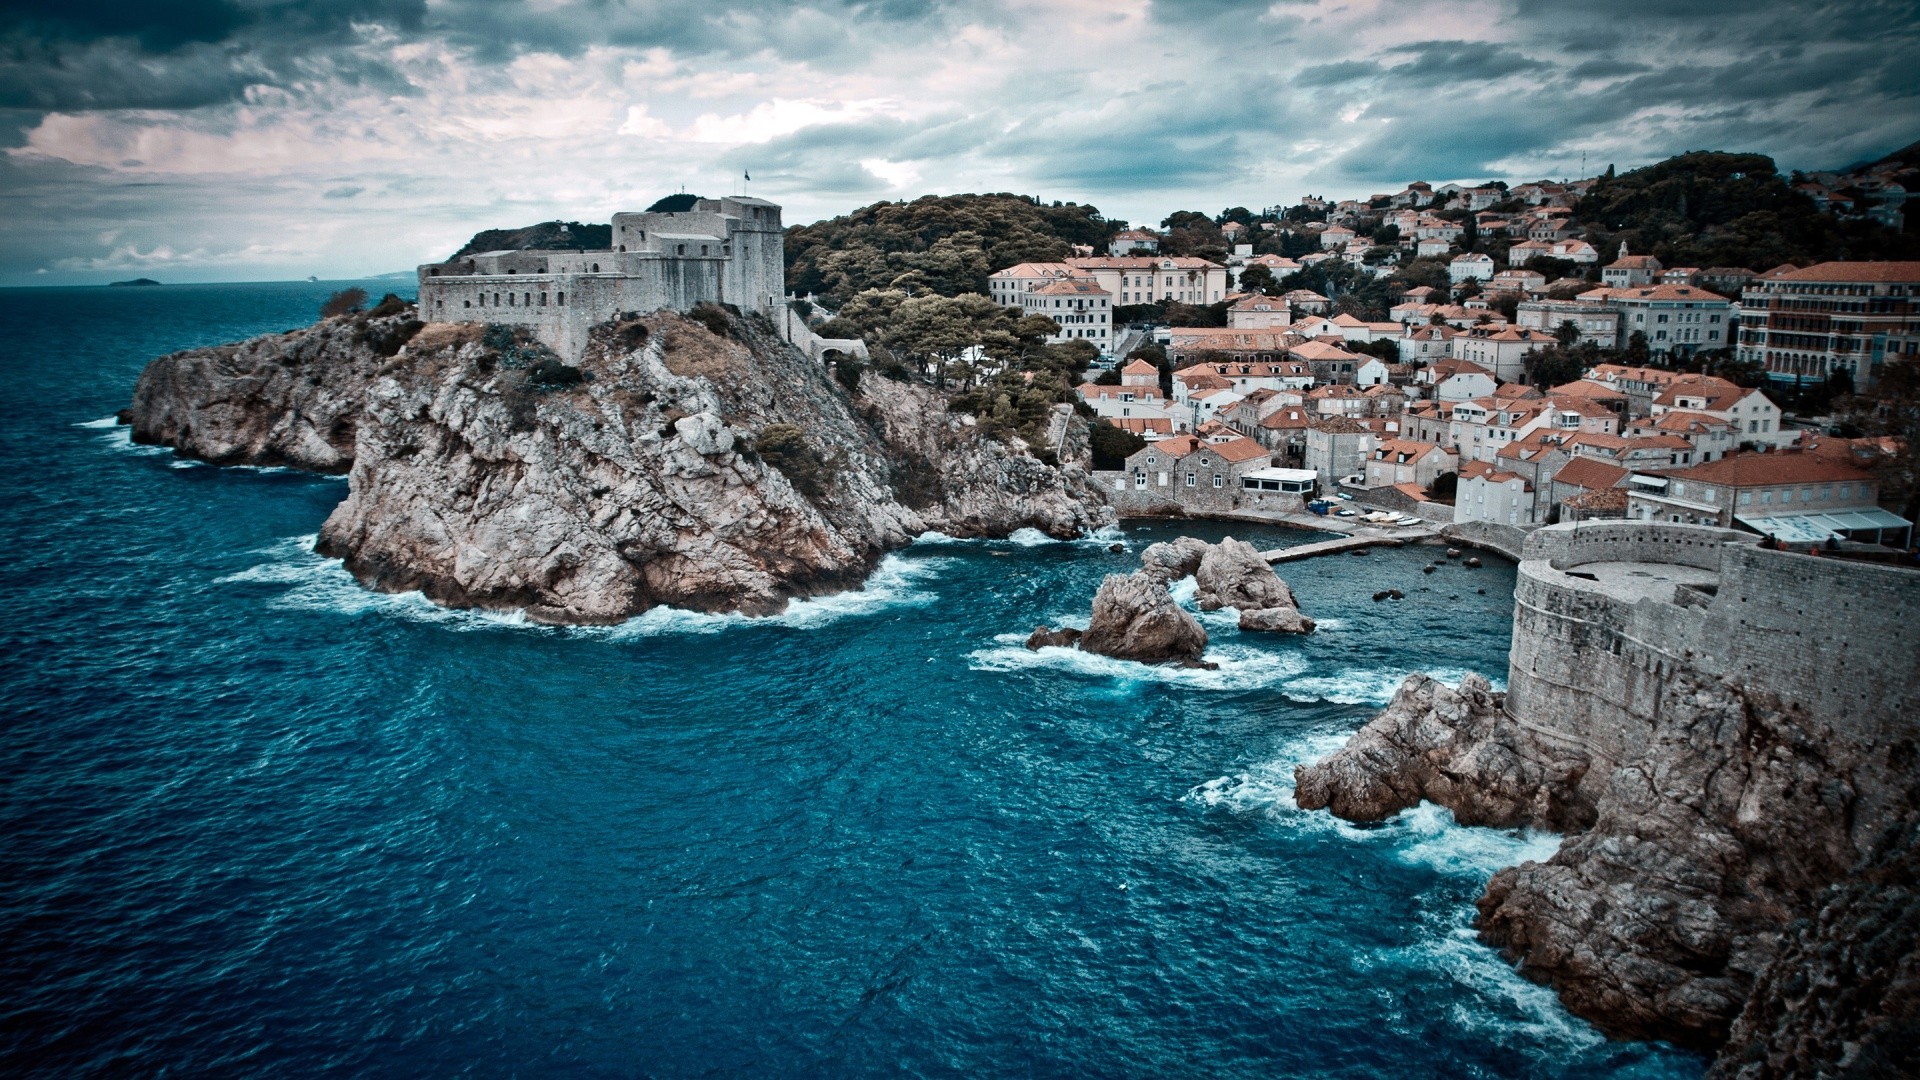 1920x1080 Related Wallpapers from Peaceful Backgrounds. Croatia Wallpapers